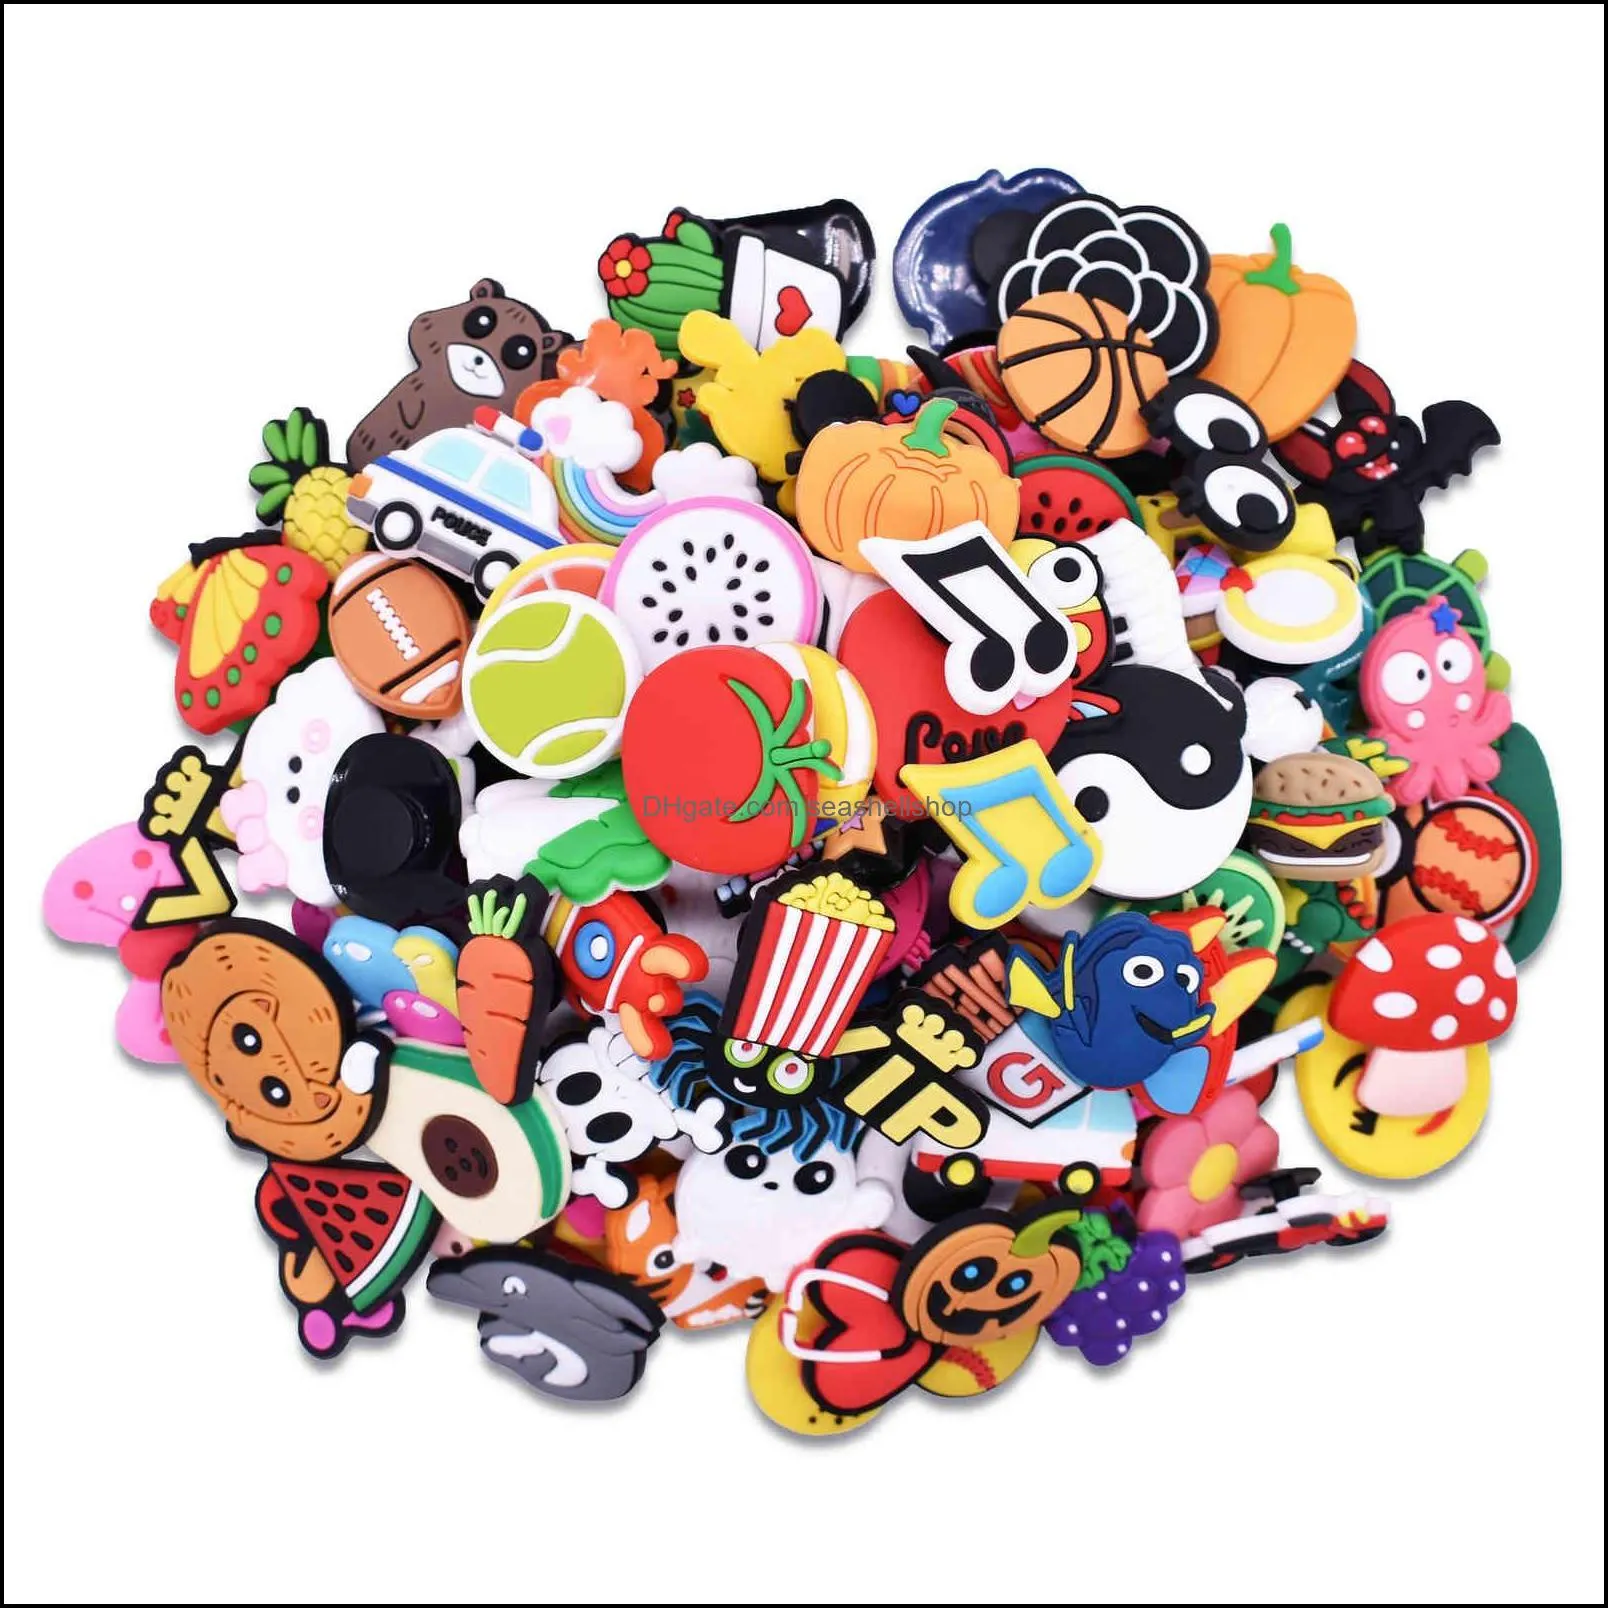 100pcs whole mix cartoon shoes charms silicone soft animal cat rabbit hole slipper accessories for kids gifts croc